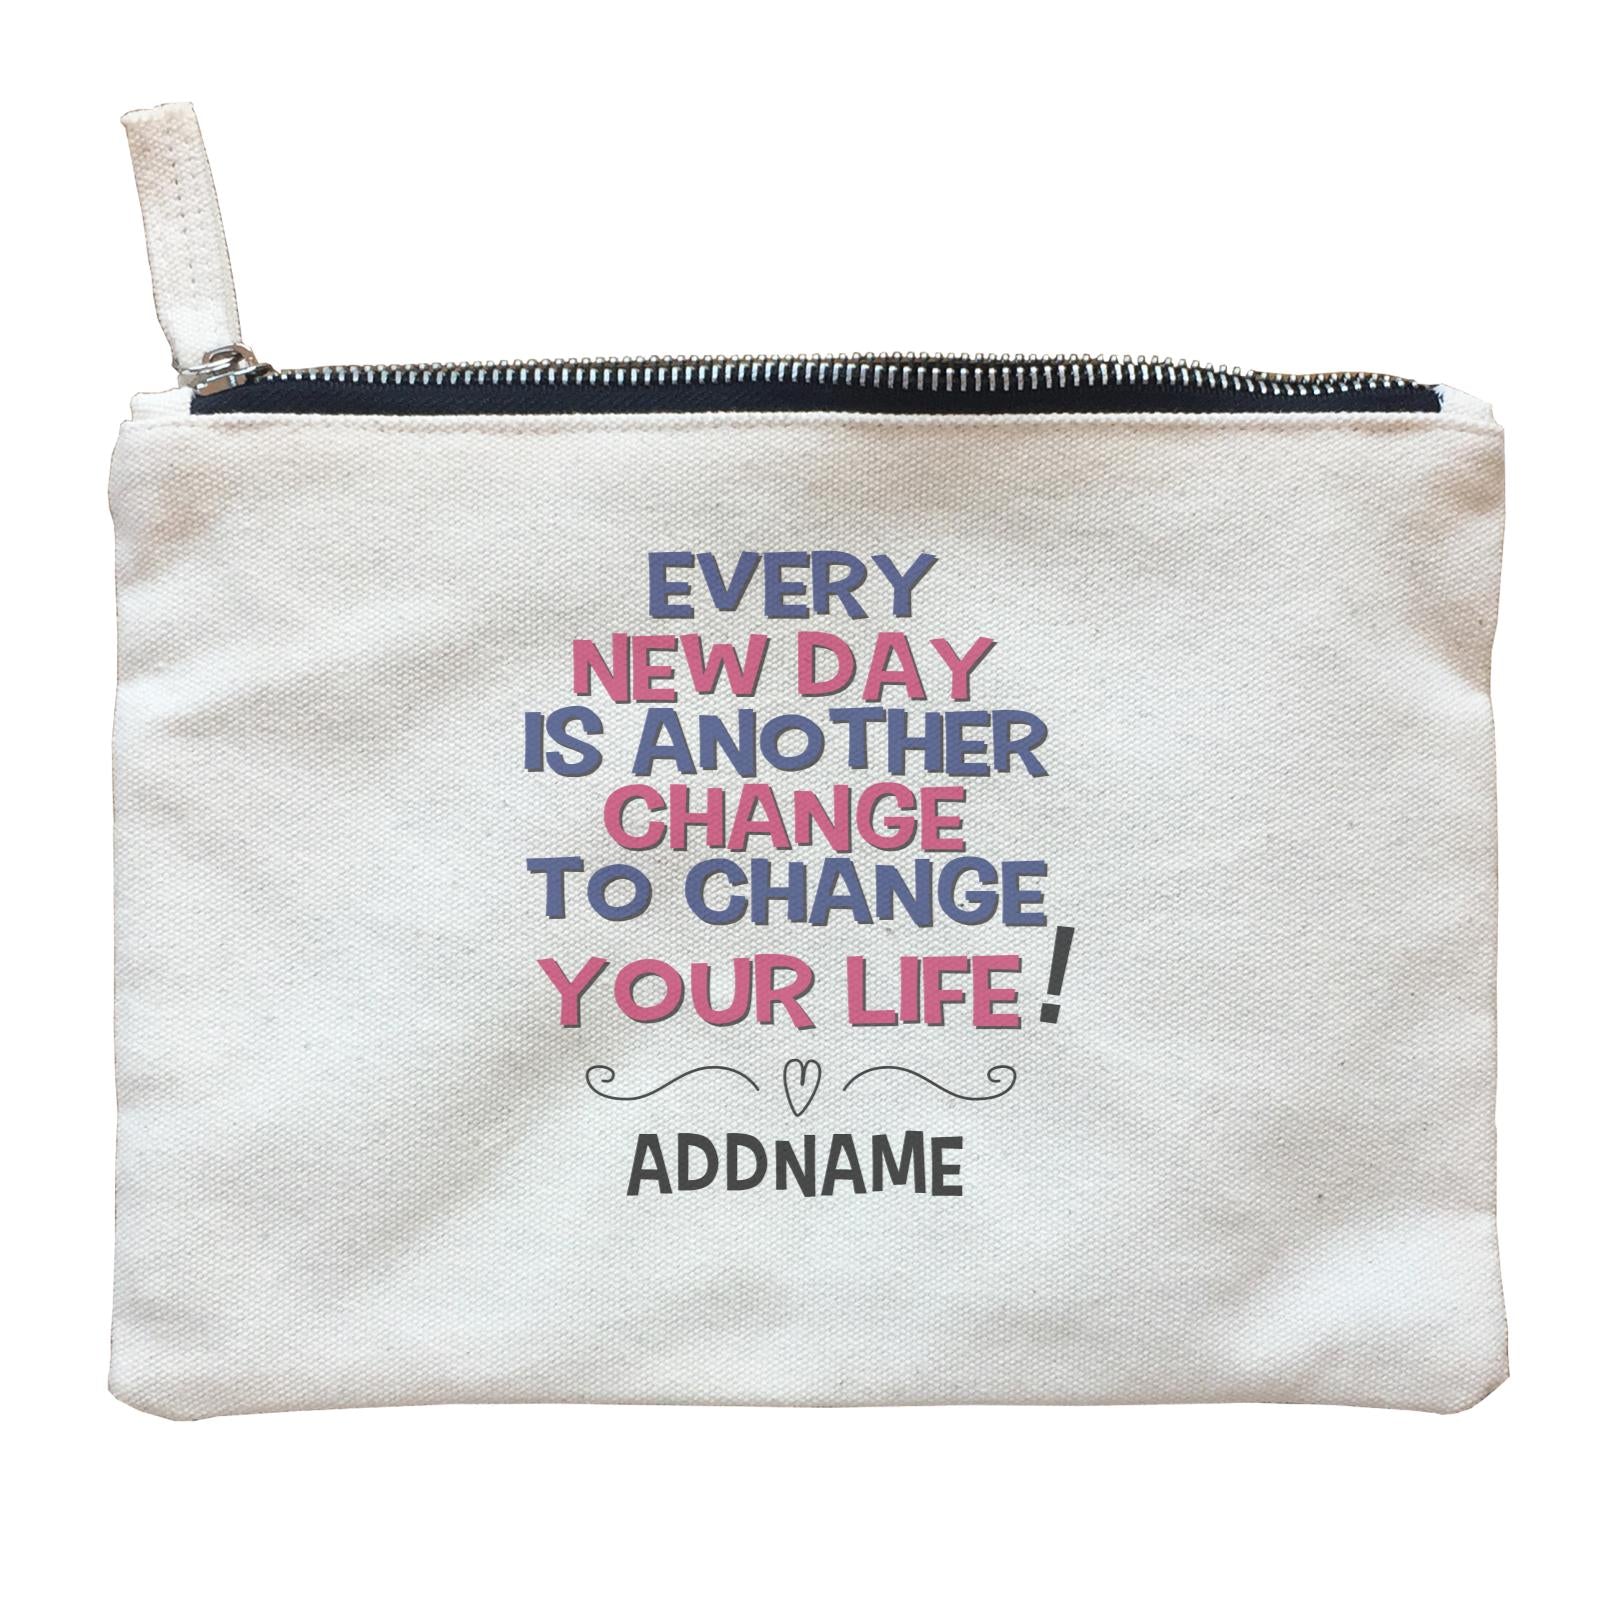 Inspiration Quotes Every New Day Is Another Chance To Change Your Life Addname Zipper Pouch